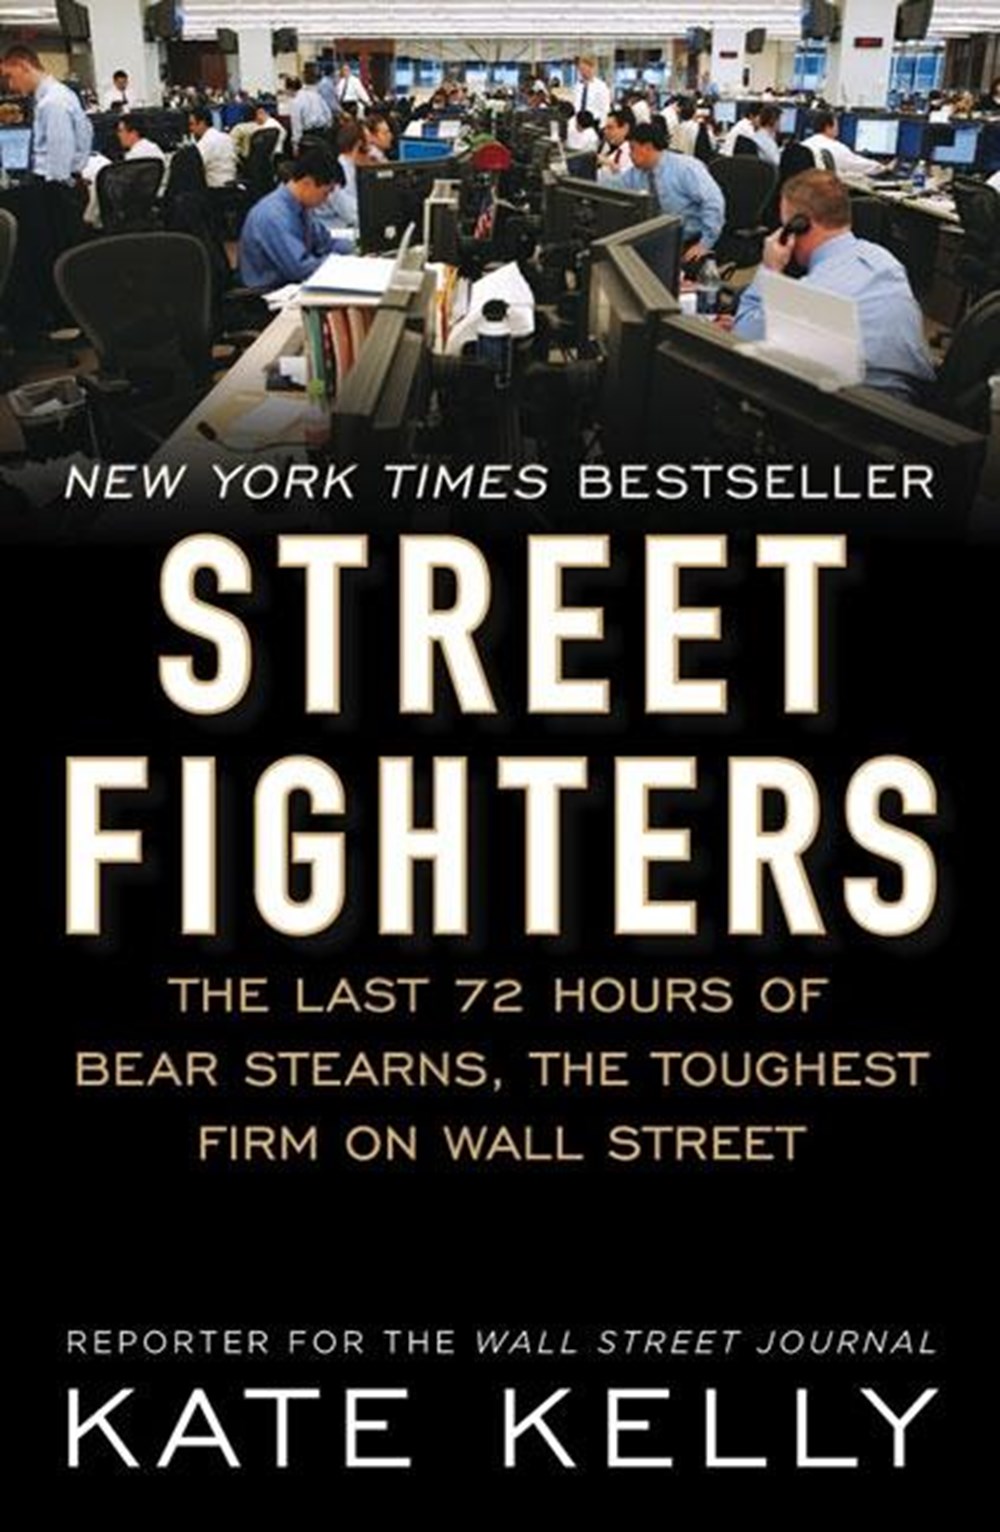 Street Fighters The Last 72 Hours of Bear Stearns, the Toughest Firm on Wall Street